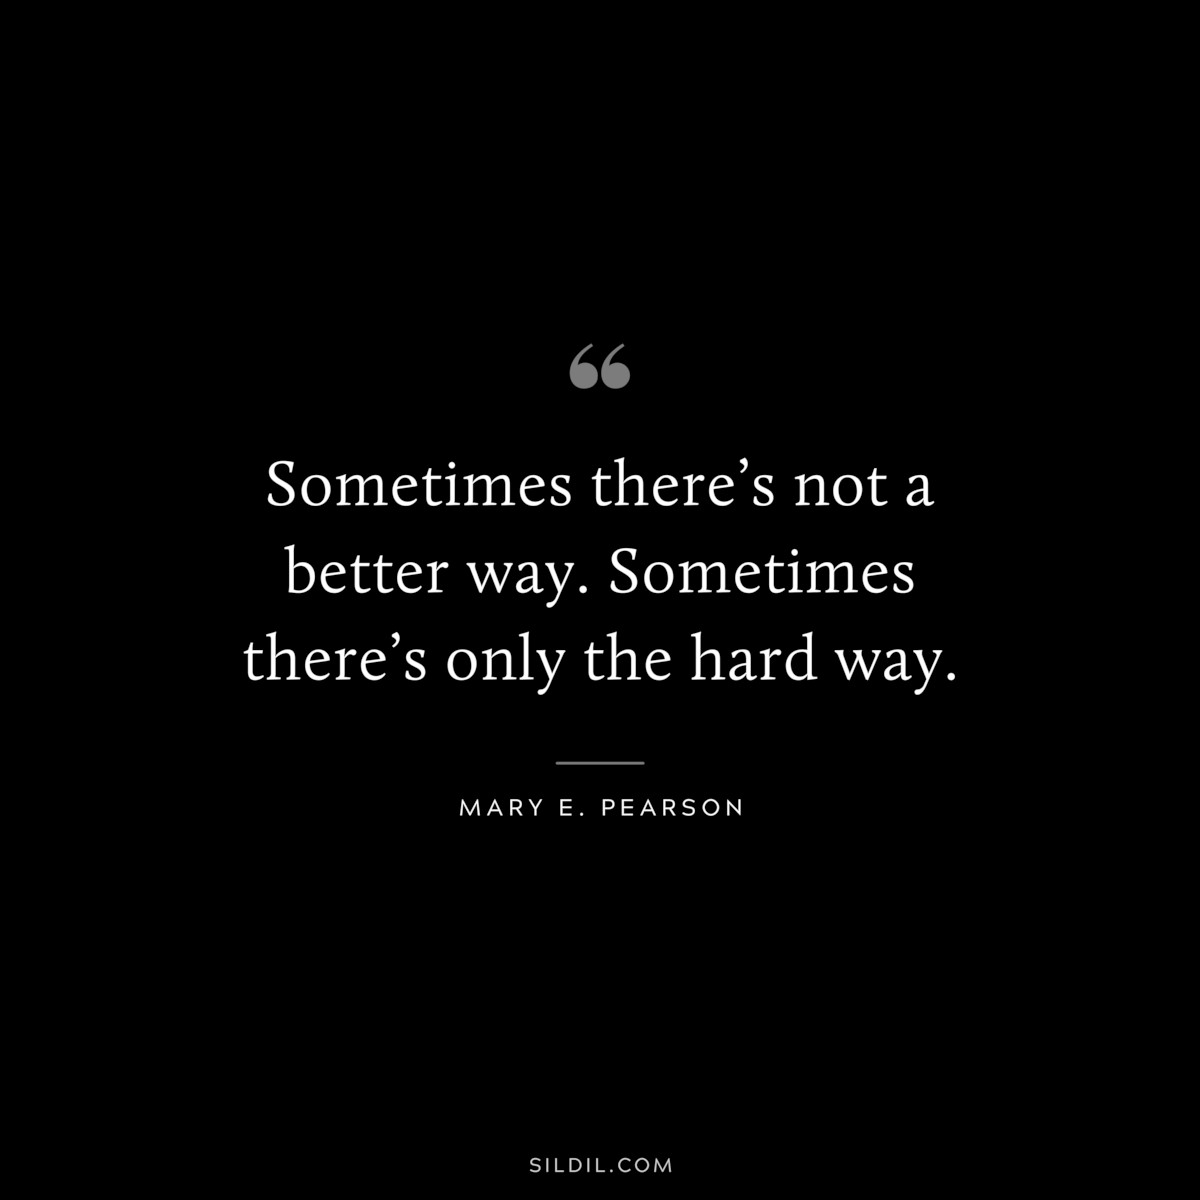 Sometimes there’s not a better way. Sometimes there’s only the hard way. ― Mary E. Pearson